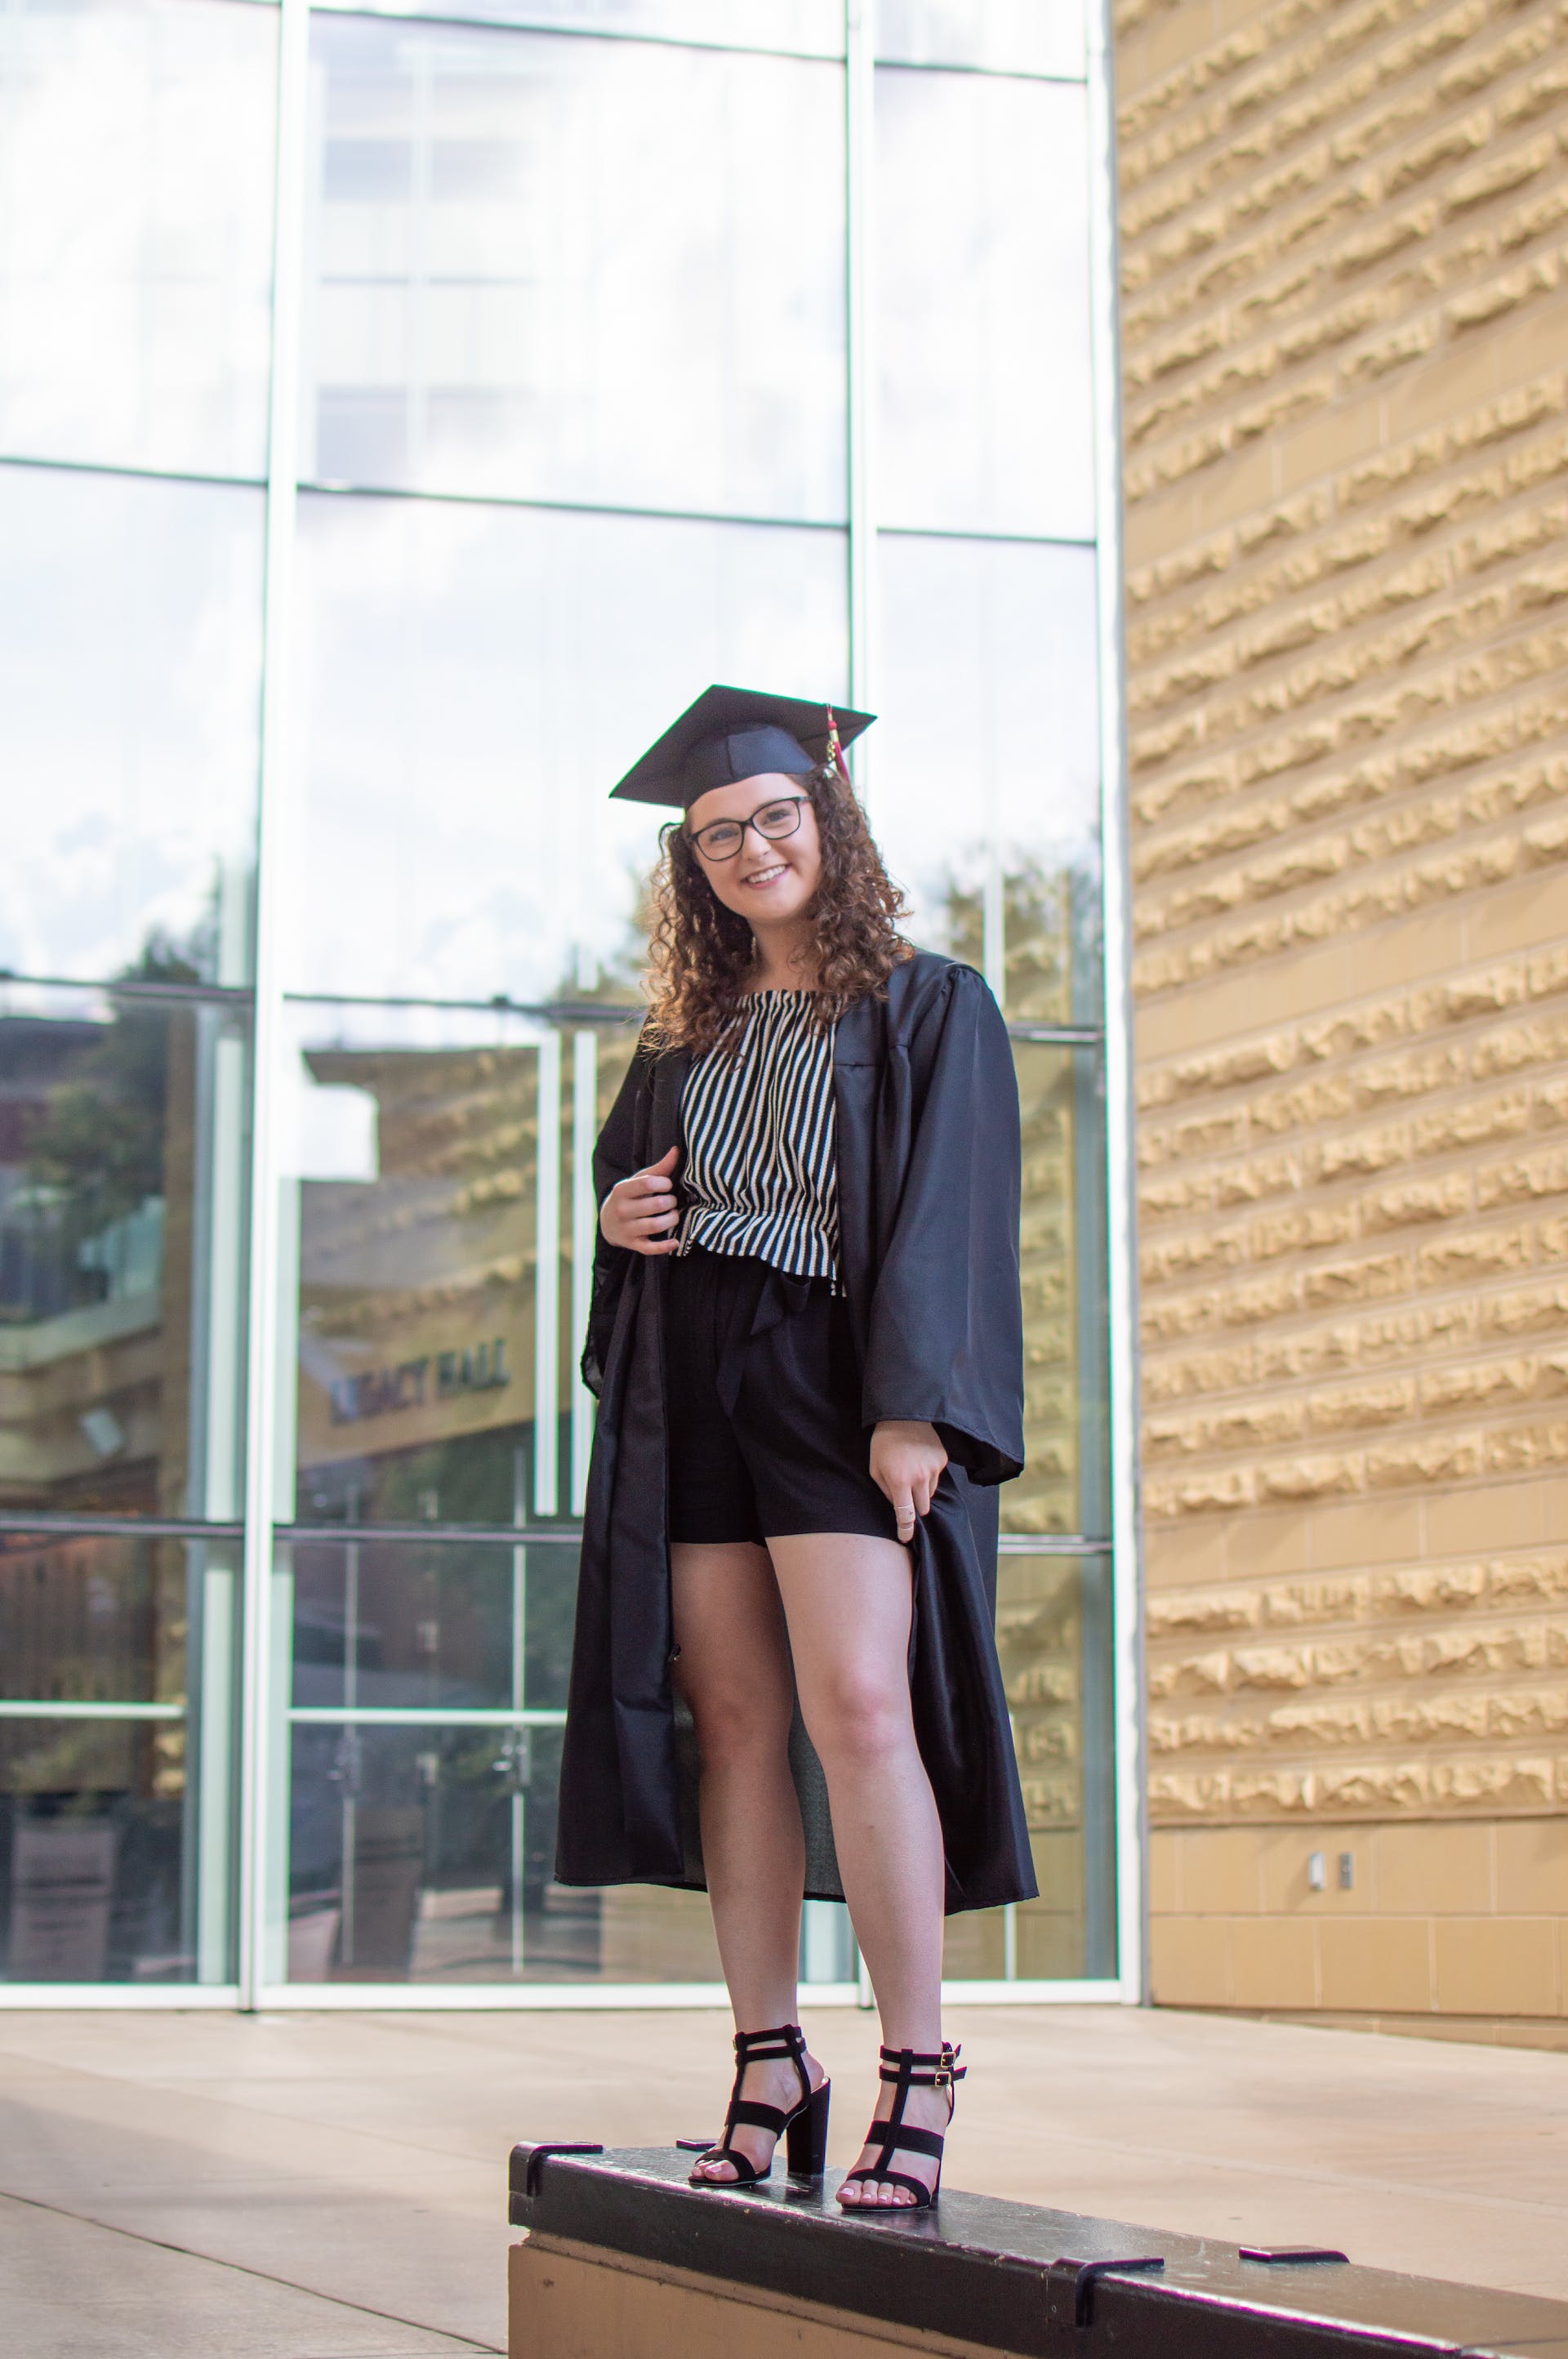 A young woman in graduation attire | Source: Pexels